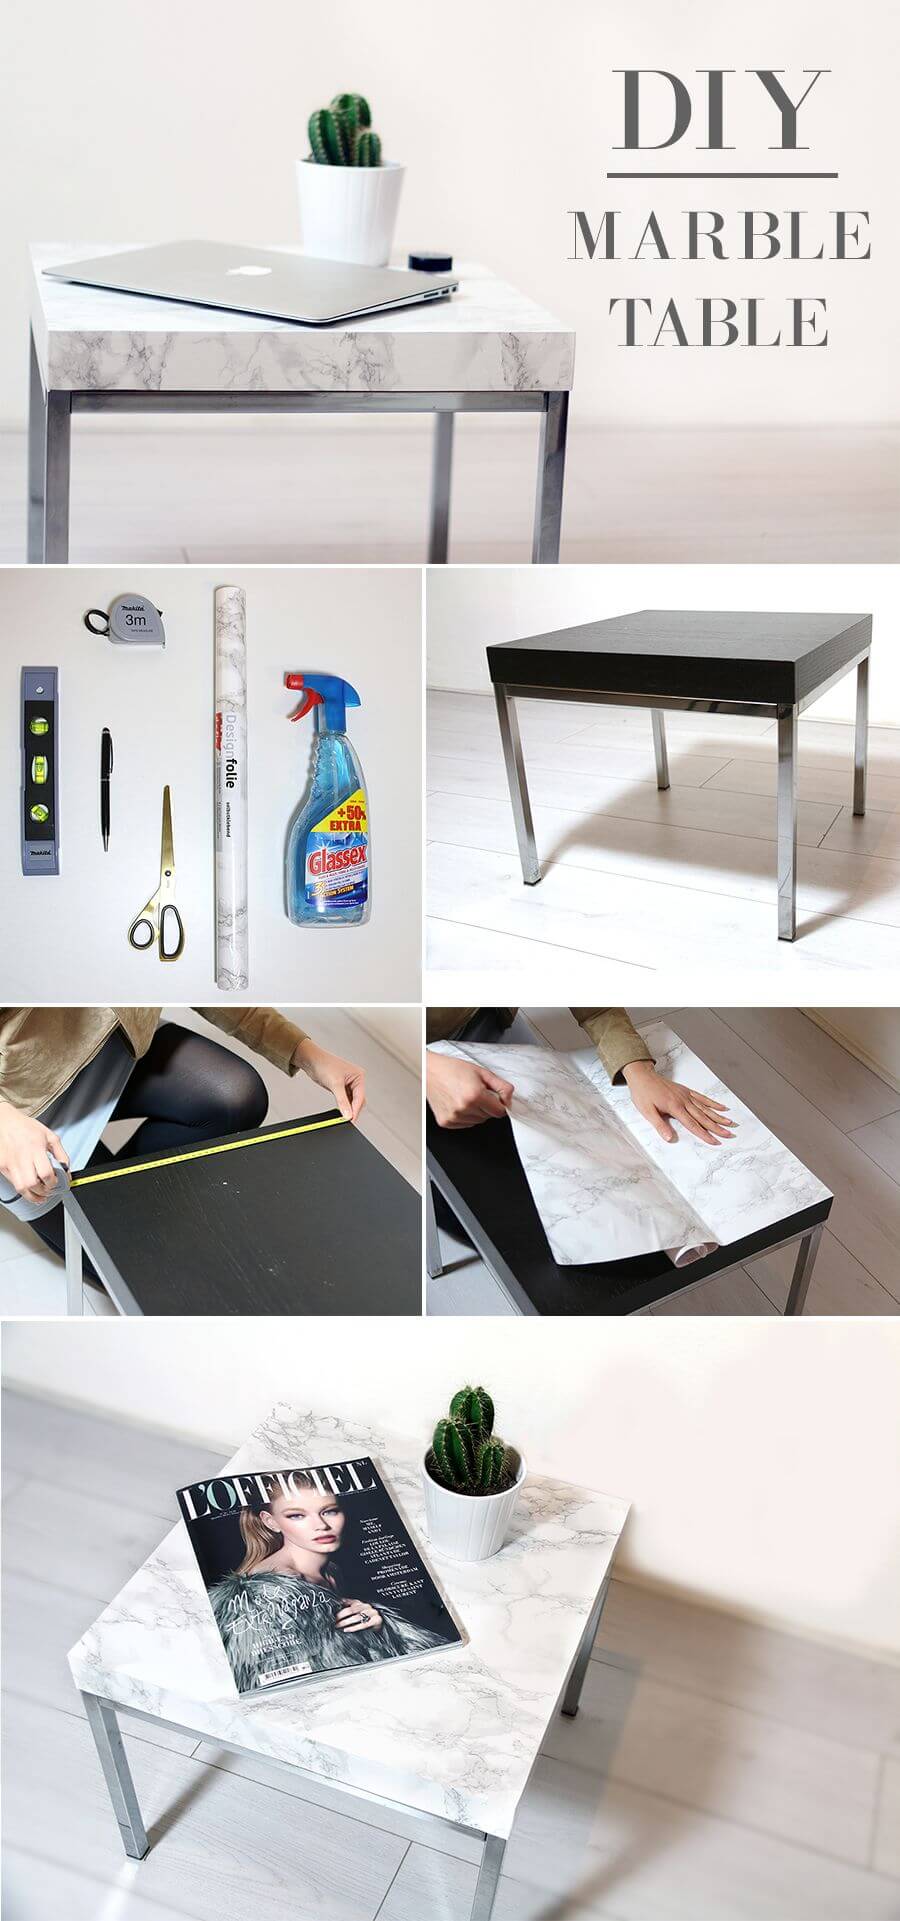 15 Outstanding DIY Side Table Projects You Will Not Be Able To Resist